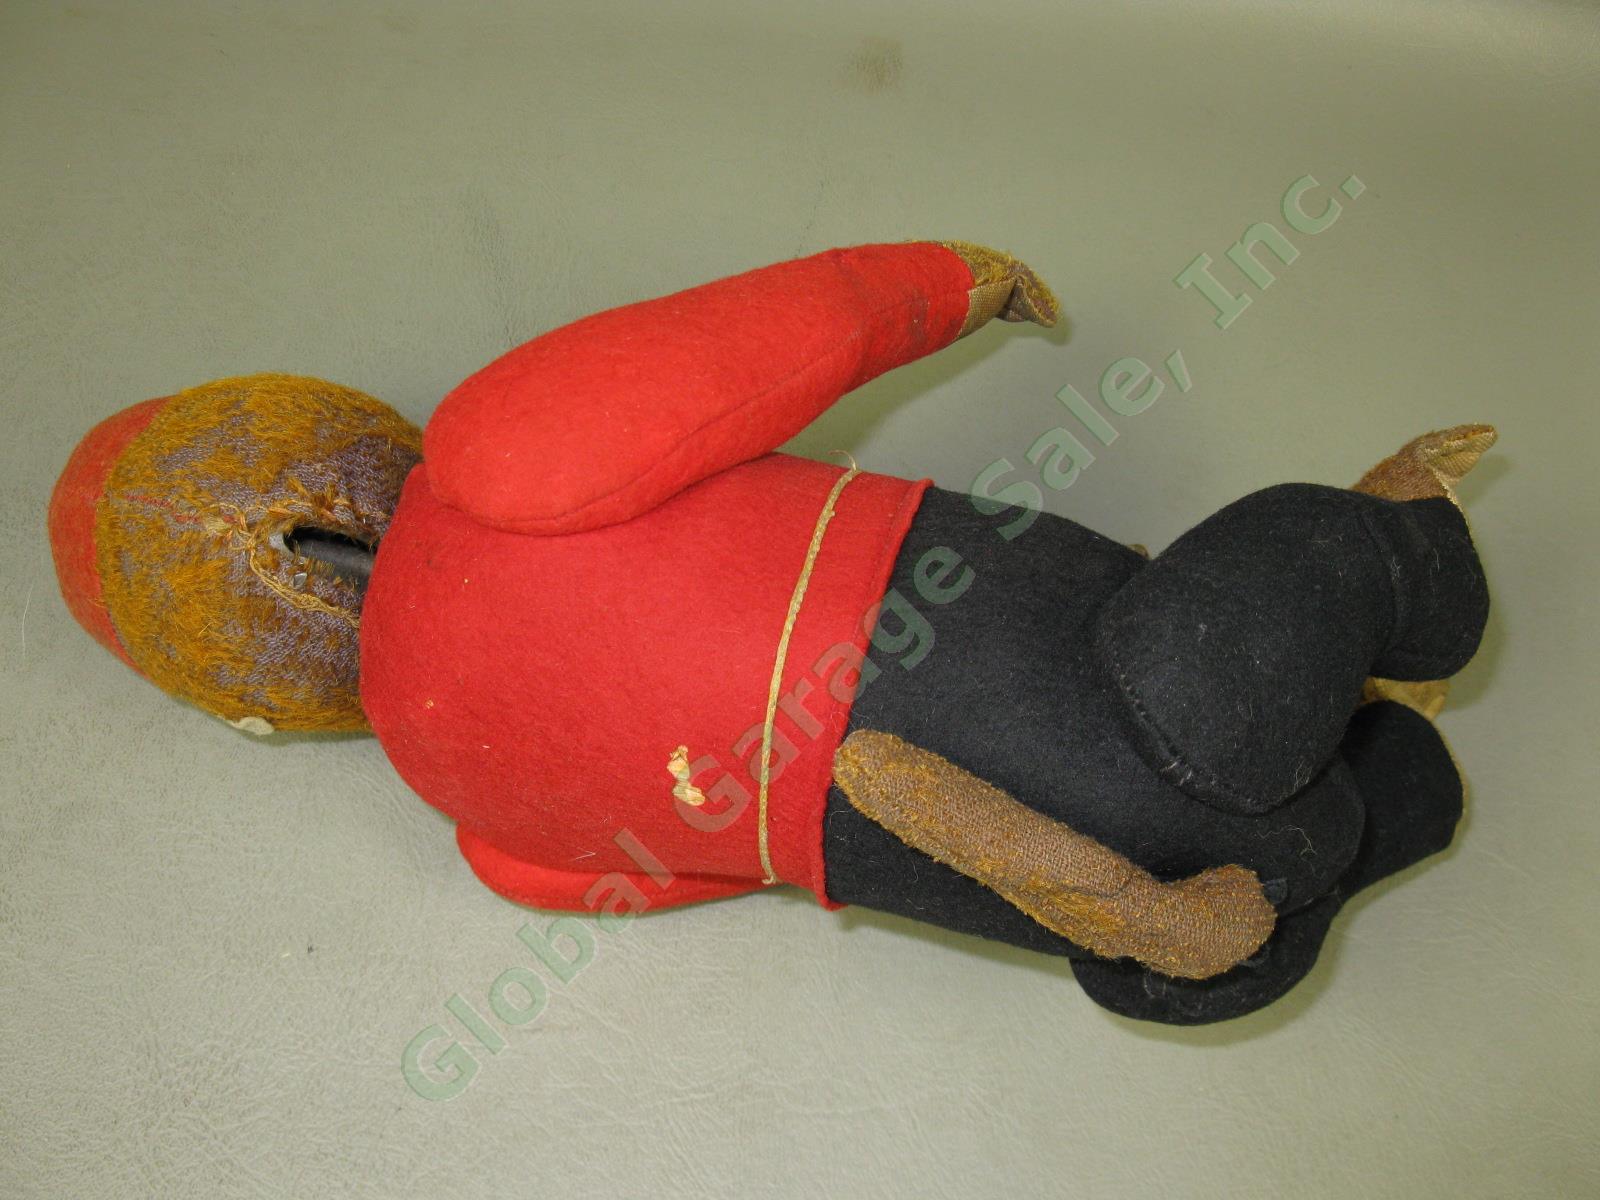 Vtg Antique 1920s Schuco Yes No Jointed Monkey Toy W/ Red Bellhop Uniform Works 4